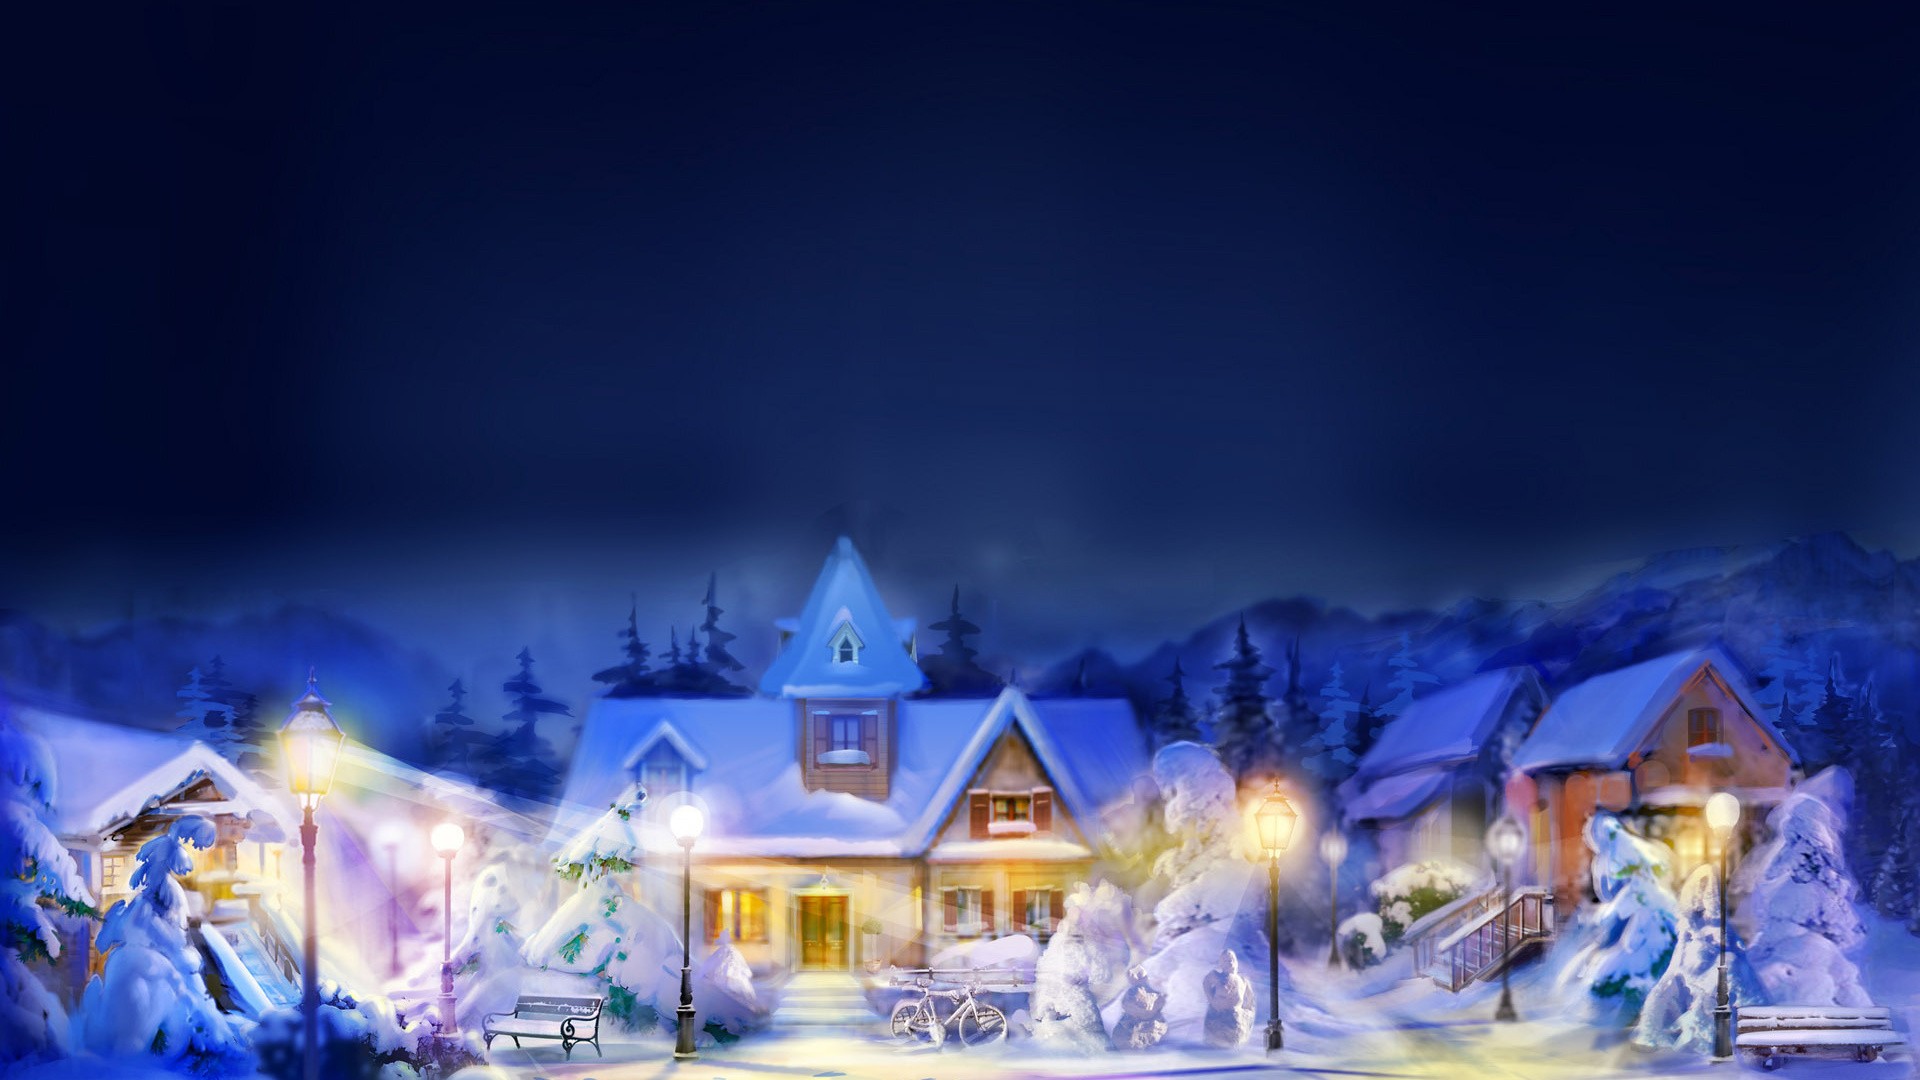 architecture, Building, Digital Art, Painting, Town, House, Snow, Winter, Lights, Blurred, Lamps, Christmas, Bench, Street, Trees, Mountain, Night Wallpaper